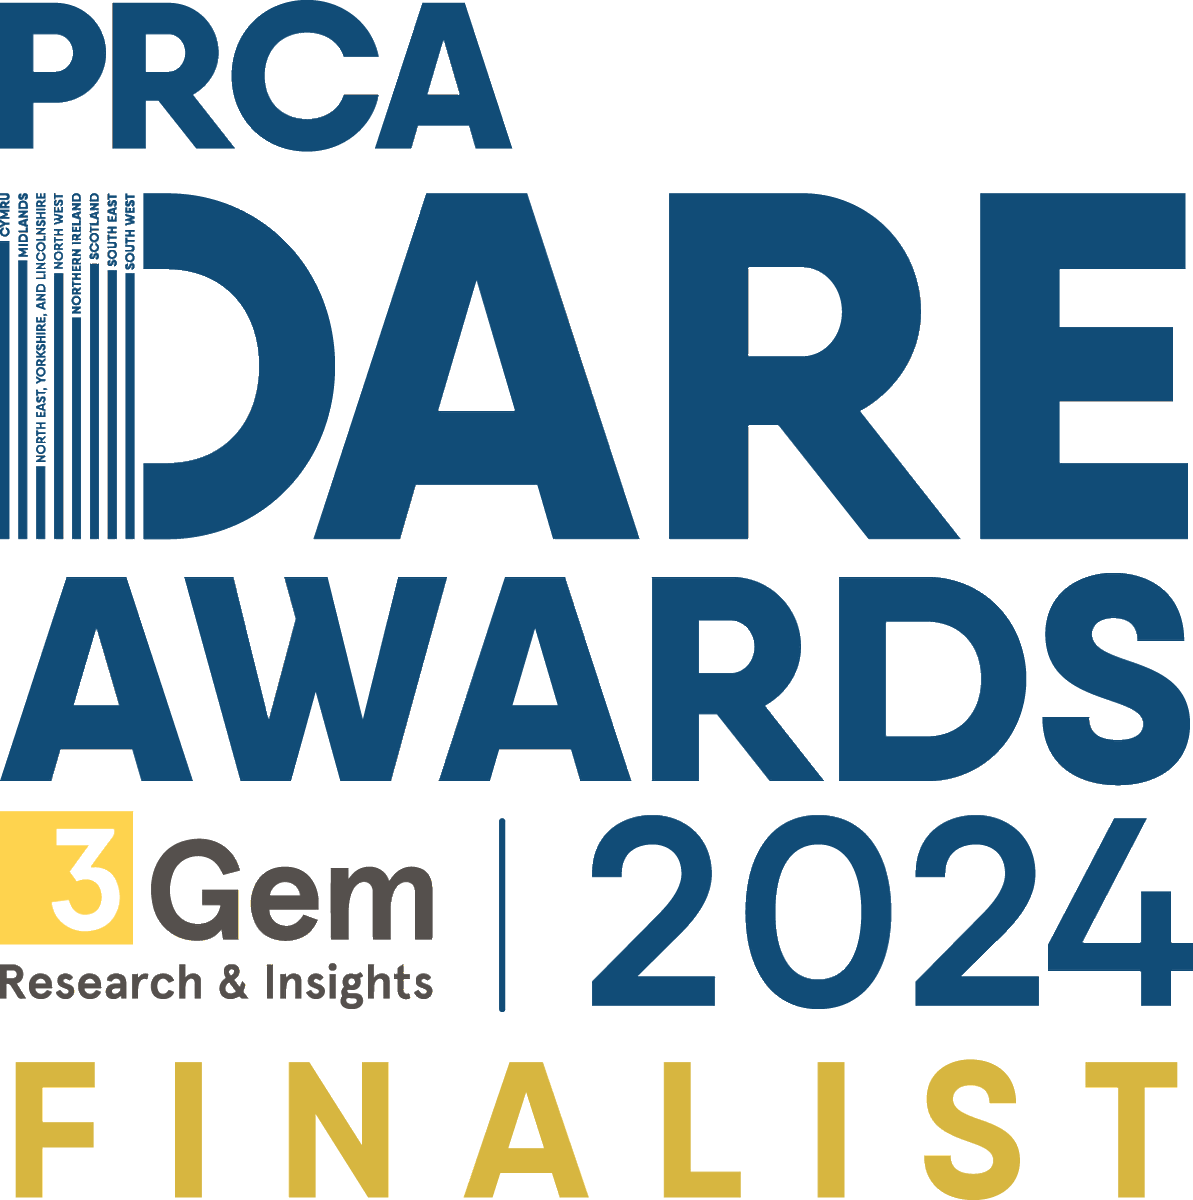 Great news for a friday!

Our Transforming Reputational Change campaign with @OneAdvanced has been shortlisted for a PRCA Dare Award in the B2B Award category.

So proud to be part of an amazing group and good luck to all finalists.

#PRCADare #PRCADAREAwards